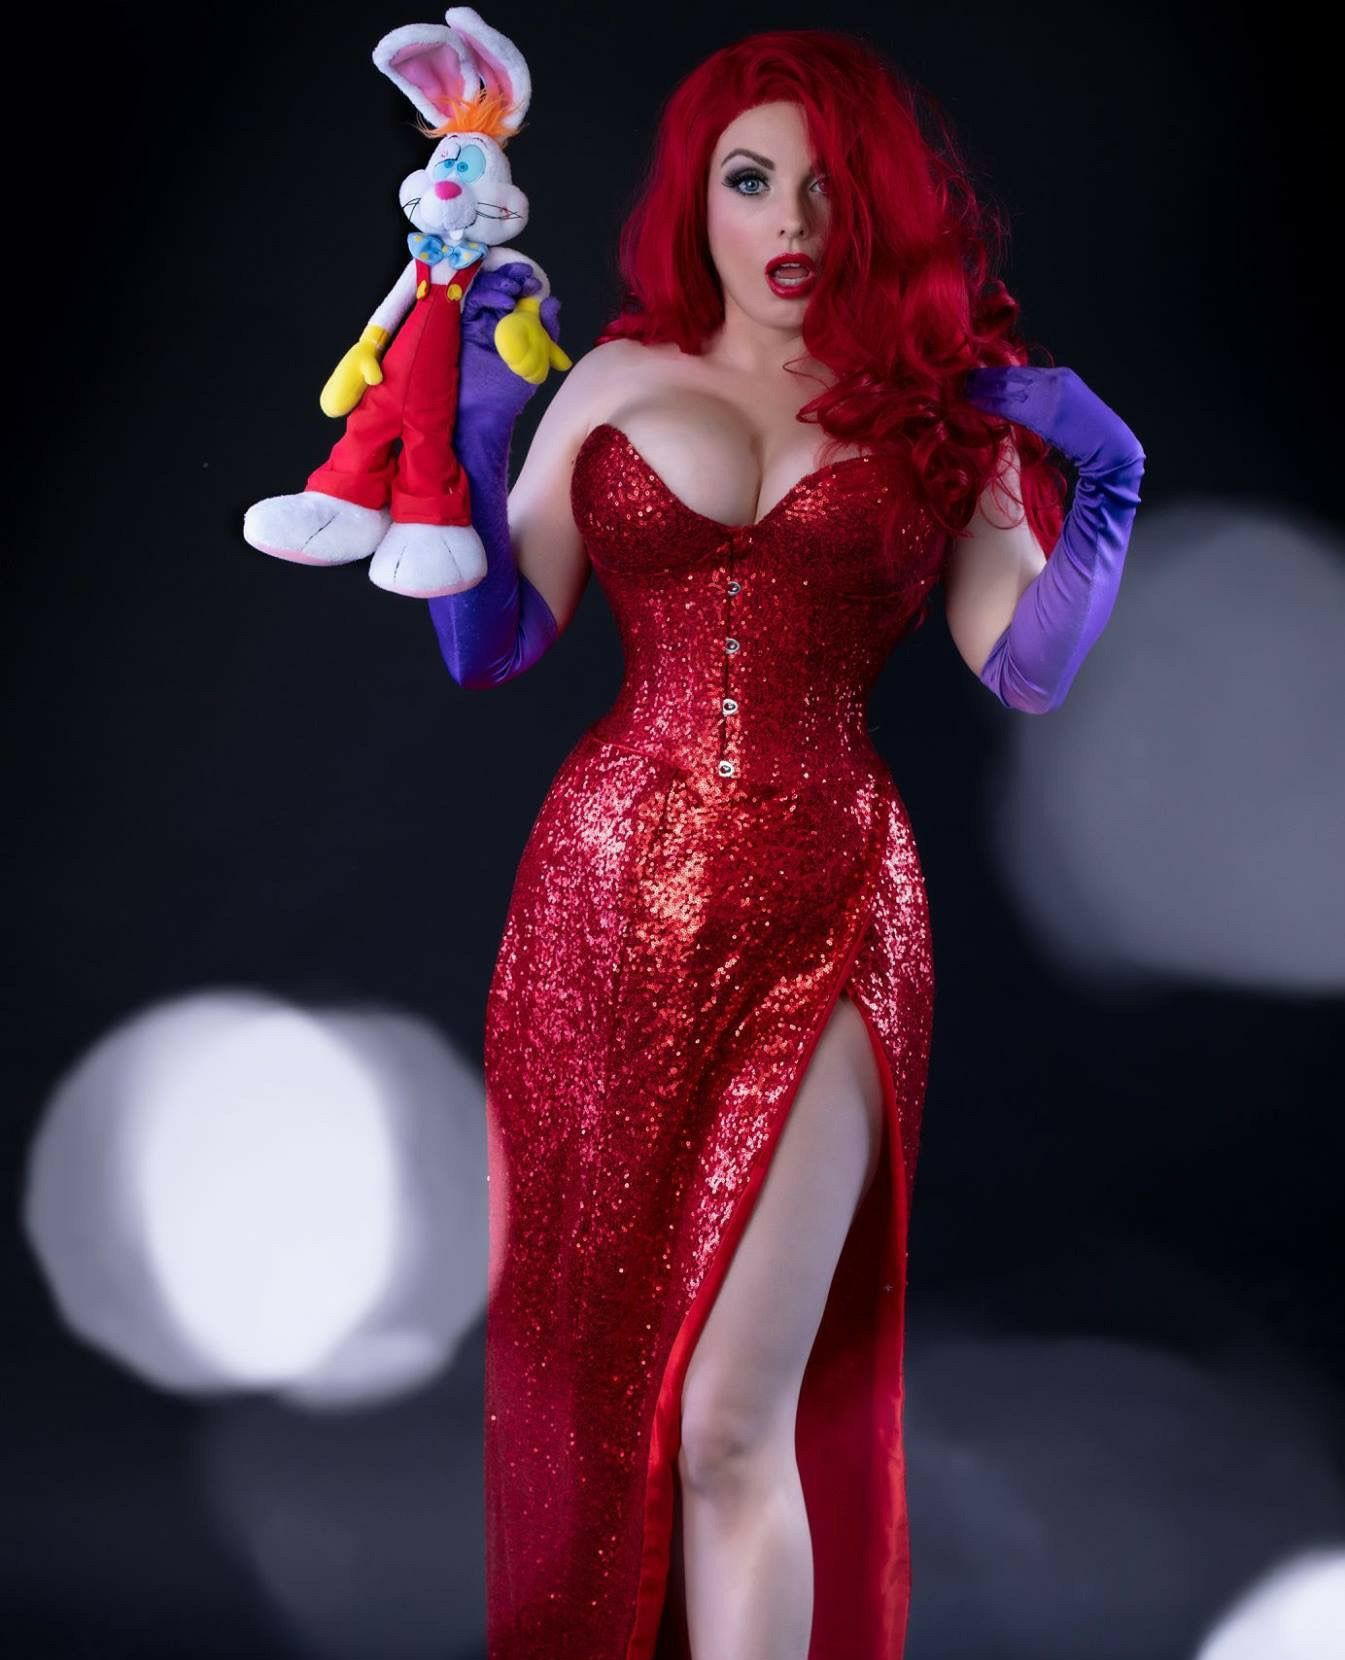 Jessica Rabbit costume act holding roger rabbit toy character